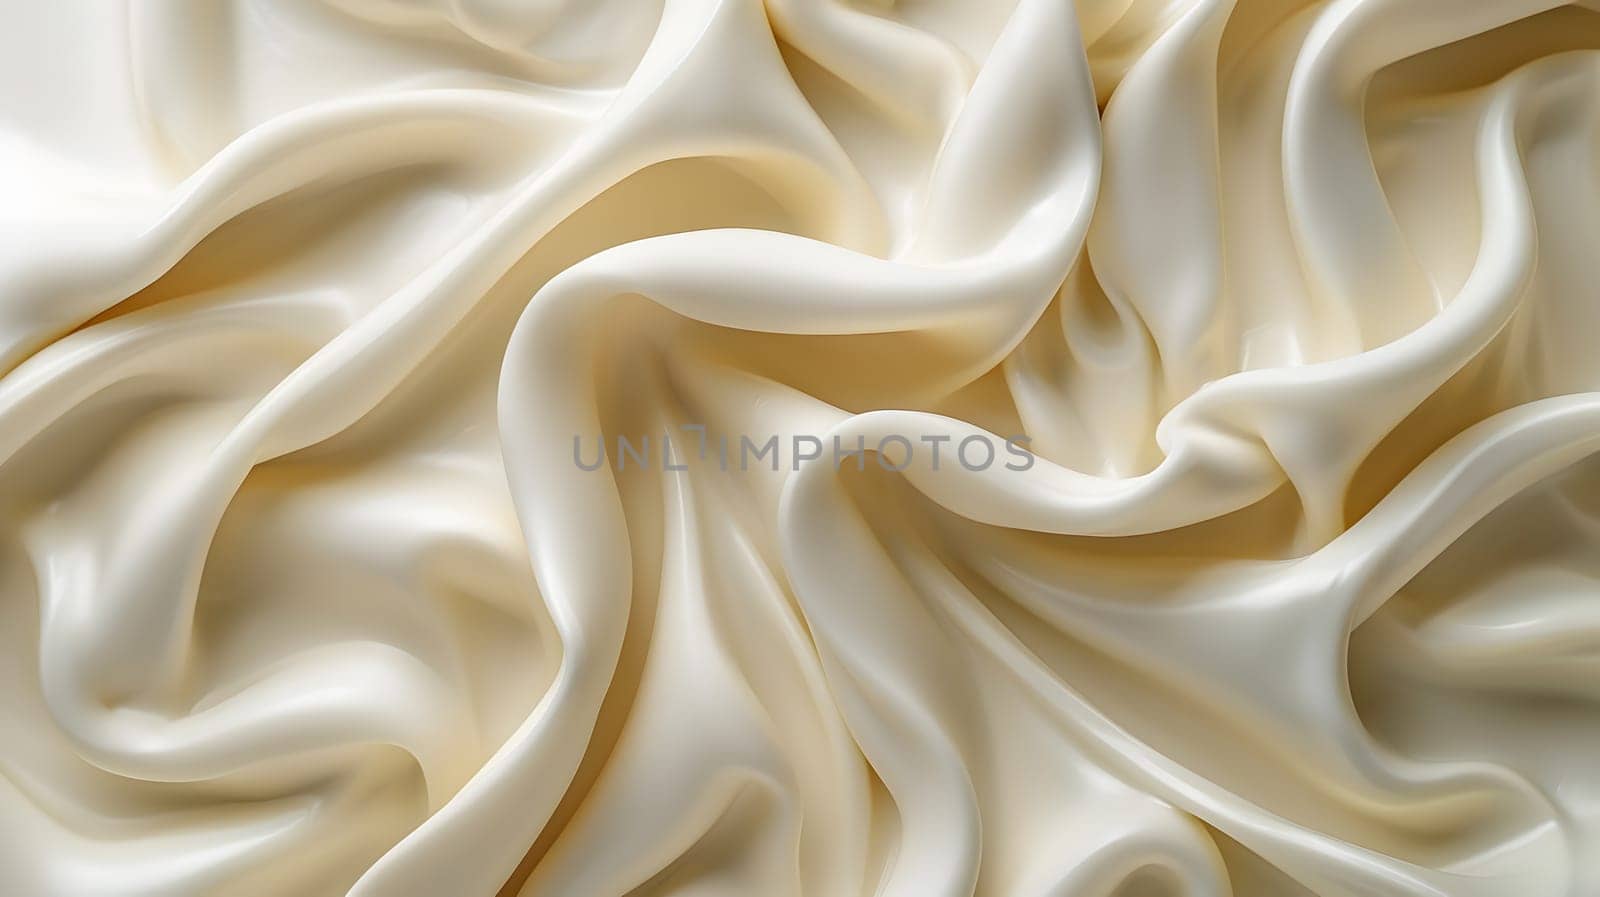 Closeup shot of white satin fabric with elegant wave pattern by Nadtochiy